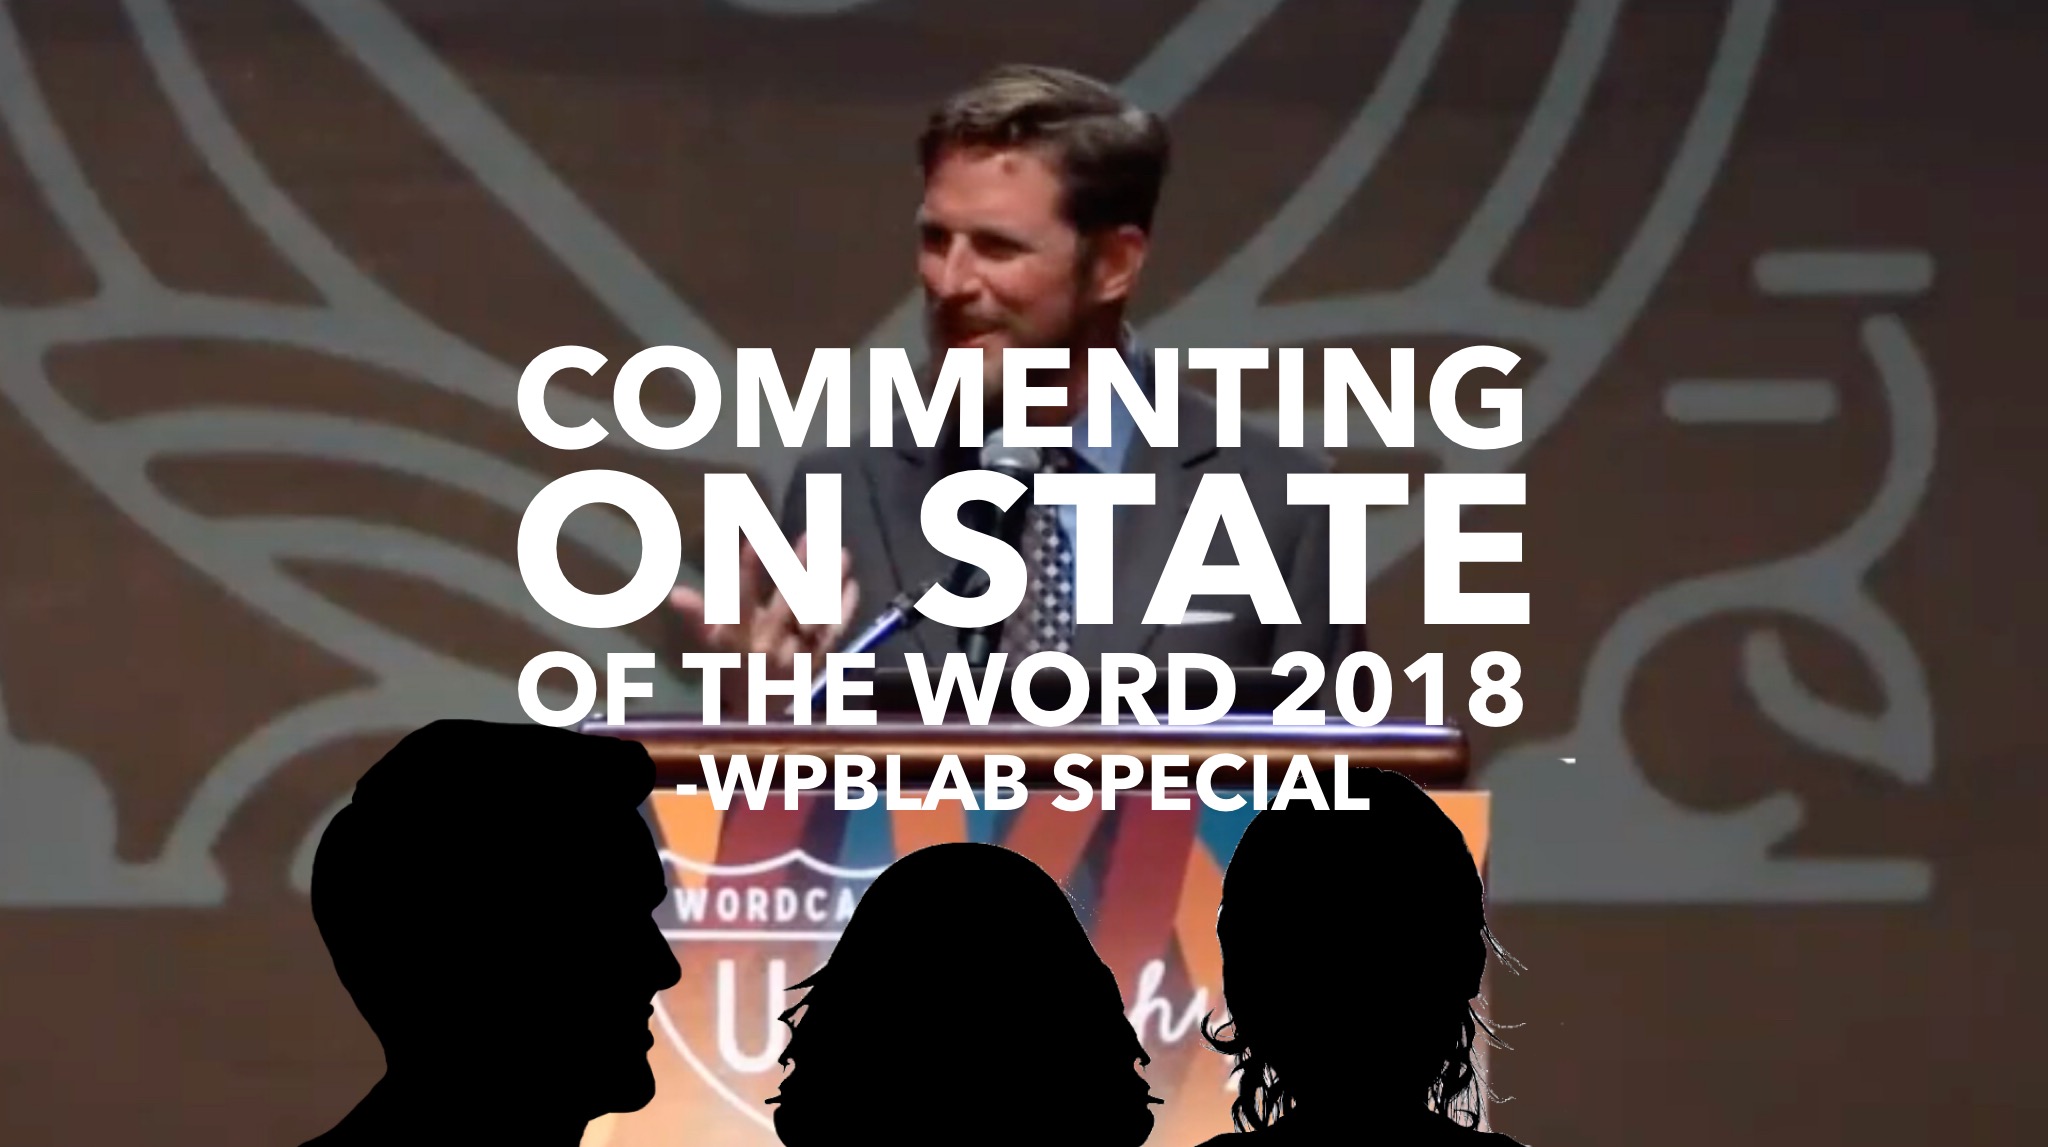 WPblab Special – Commenting on State of the Word 2018